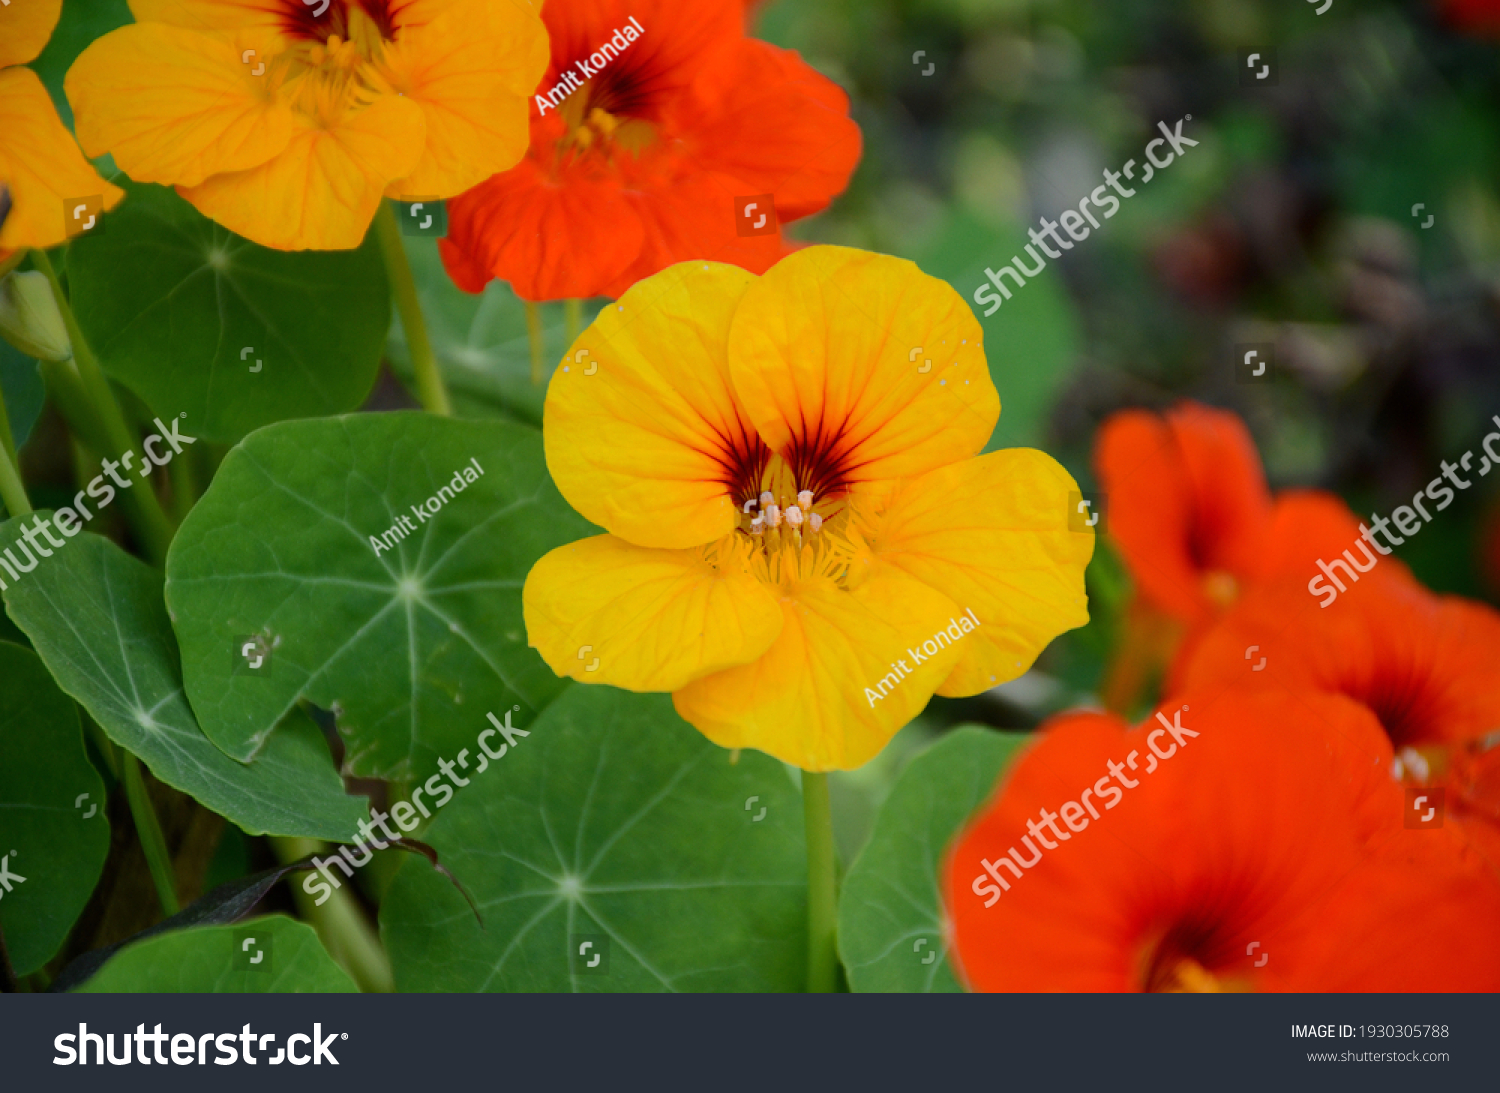 the yellow orange nasturtium flowers with vine and green leaves in the garden. #1930305788